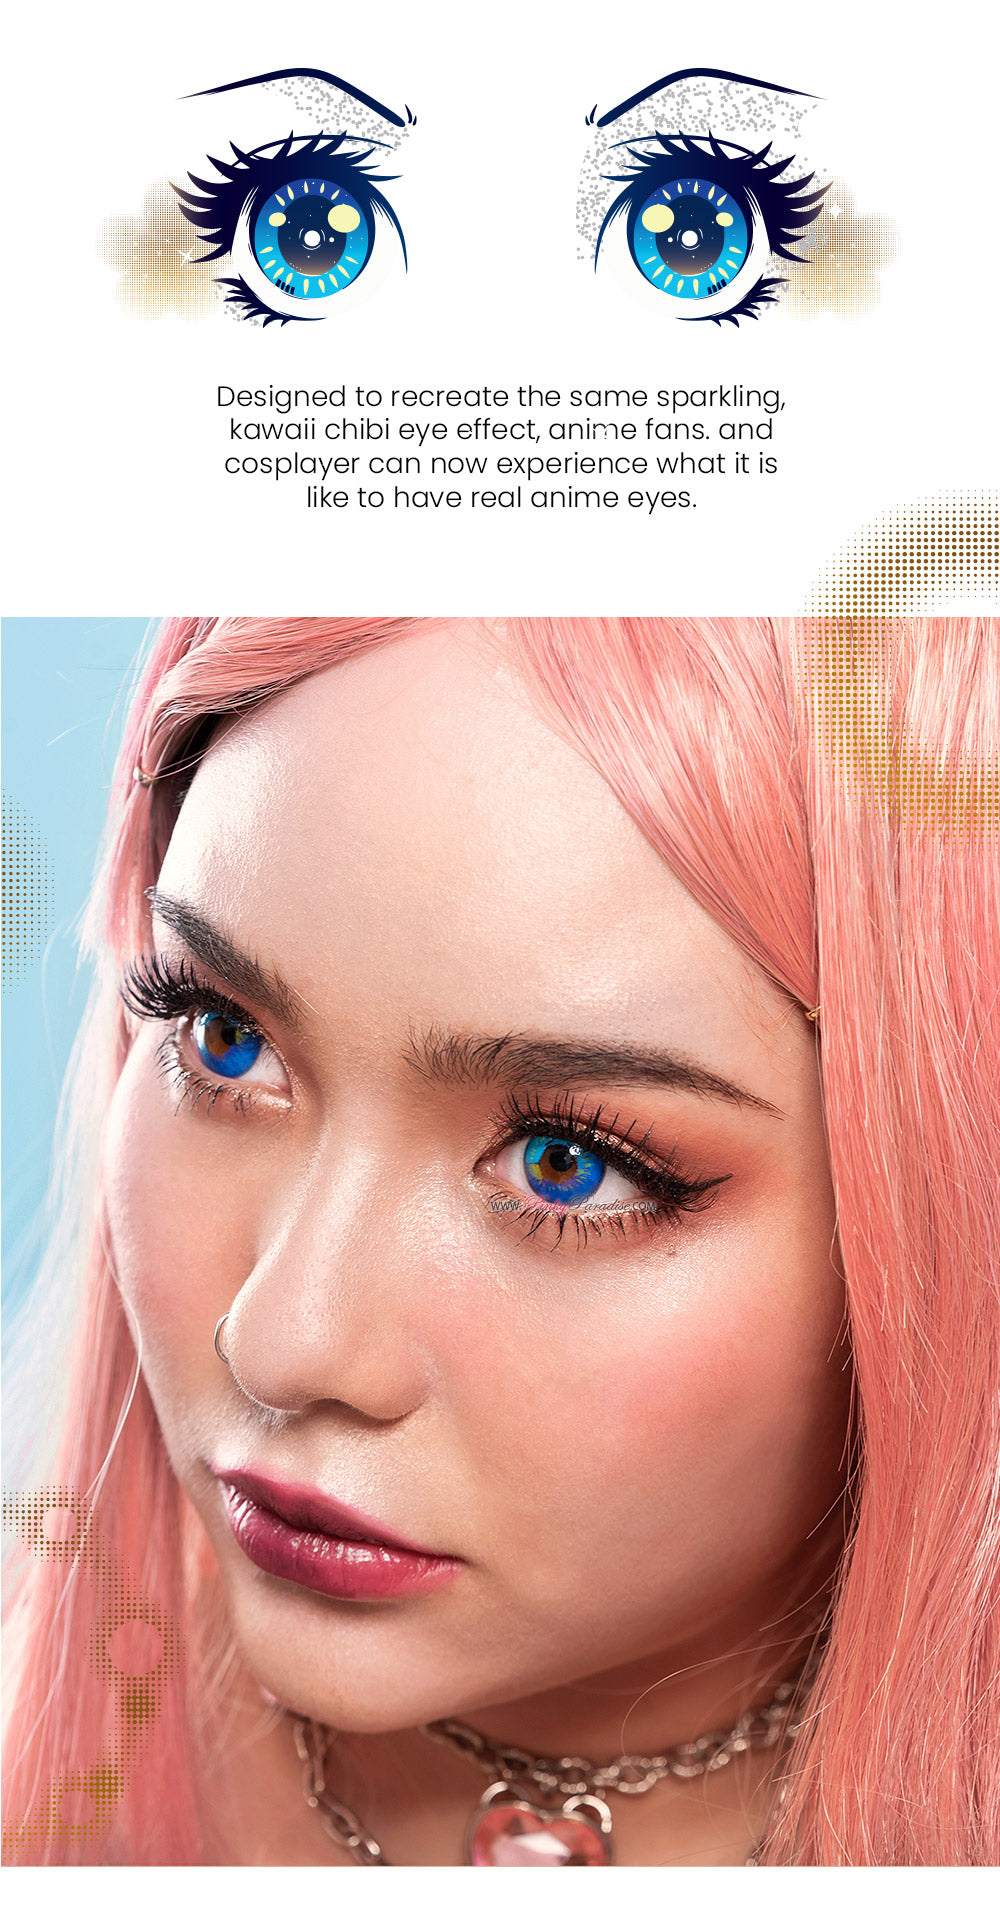 The most anime-like Blue colored contact lenses for cosplay